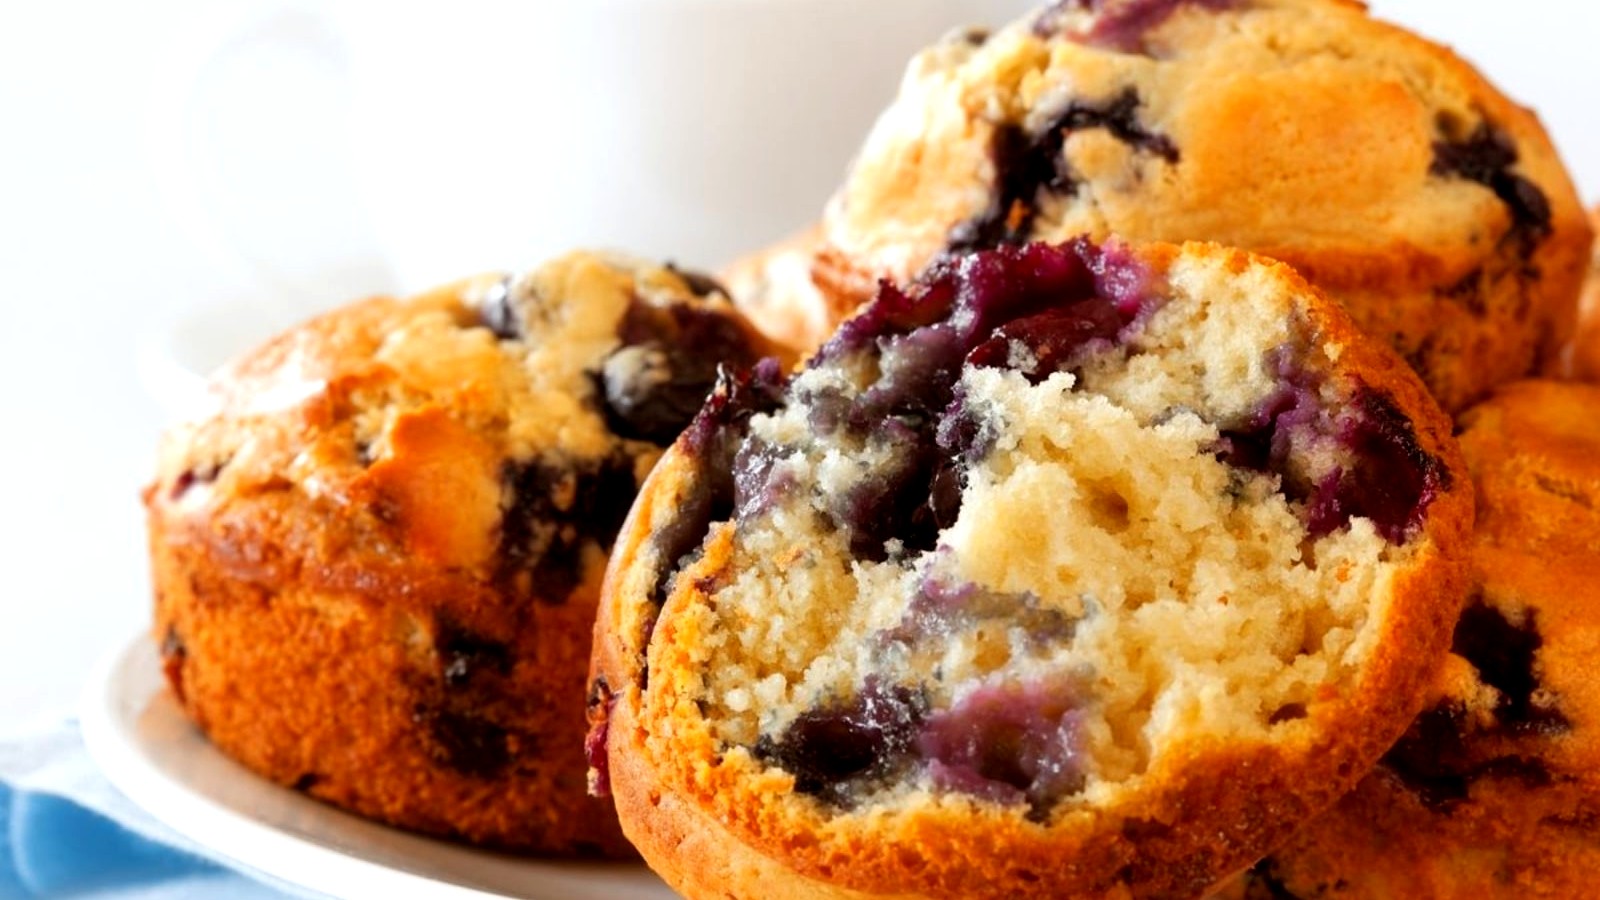 Image of Blueberry Almond Muffins